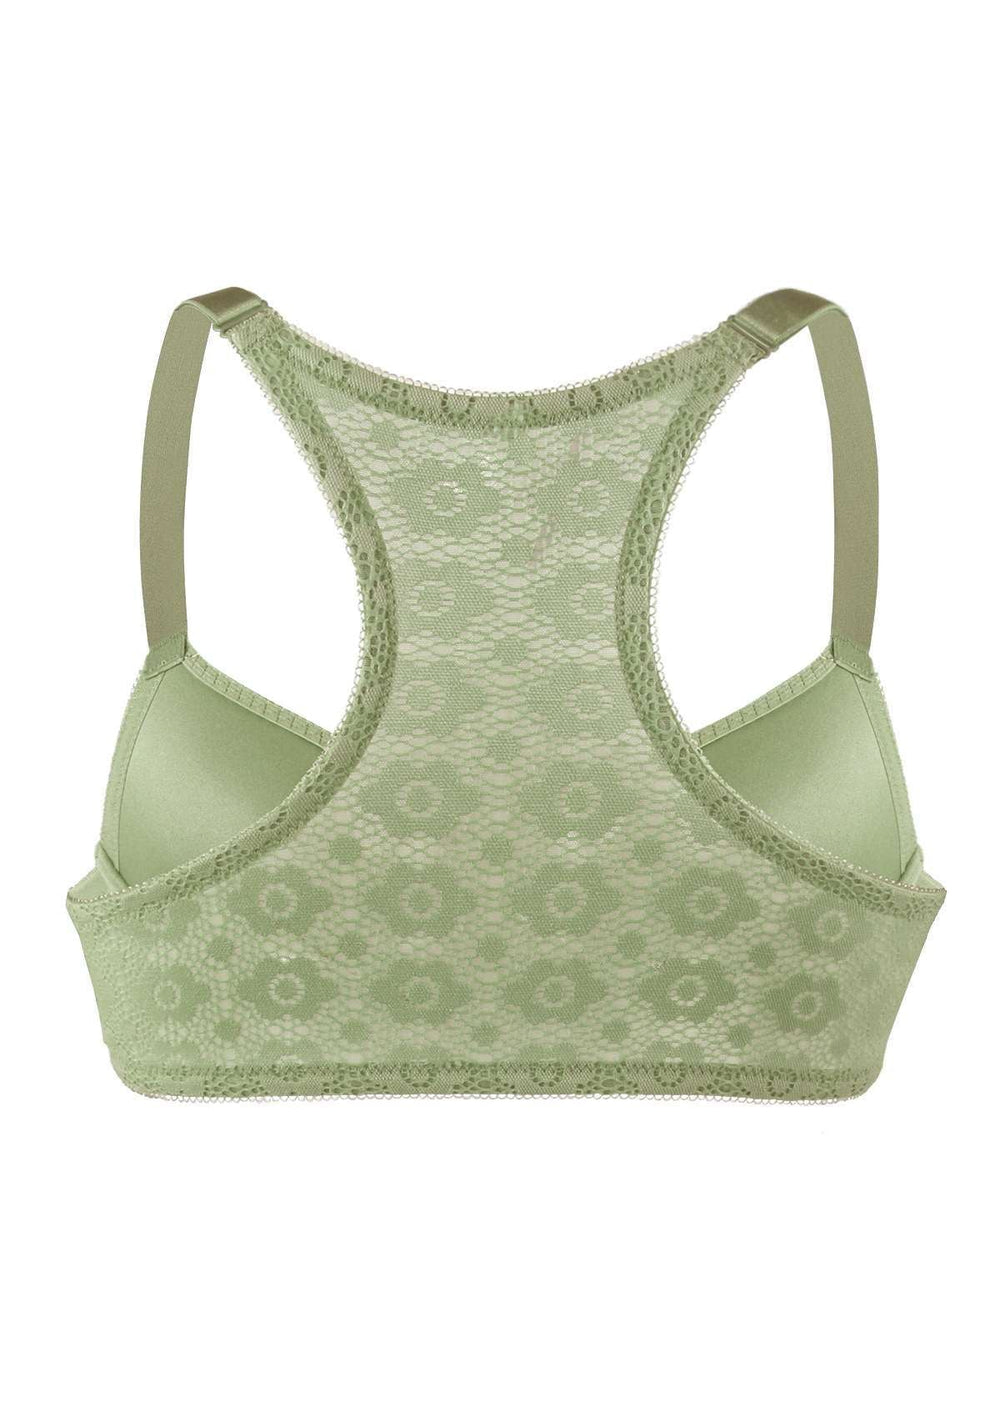 HSIA Serena Front-Close Lace Racerback Underwire Bra for Back Support